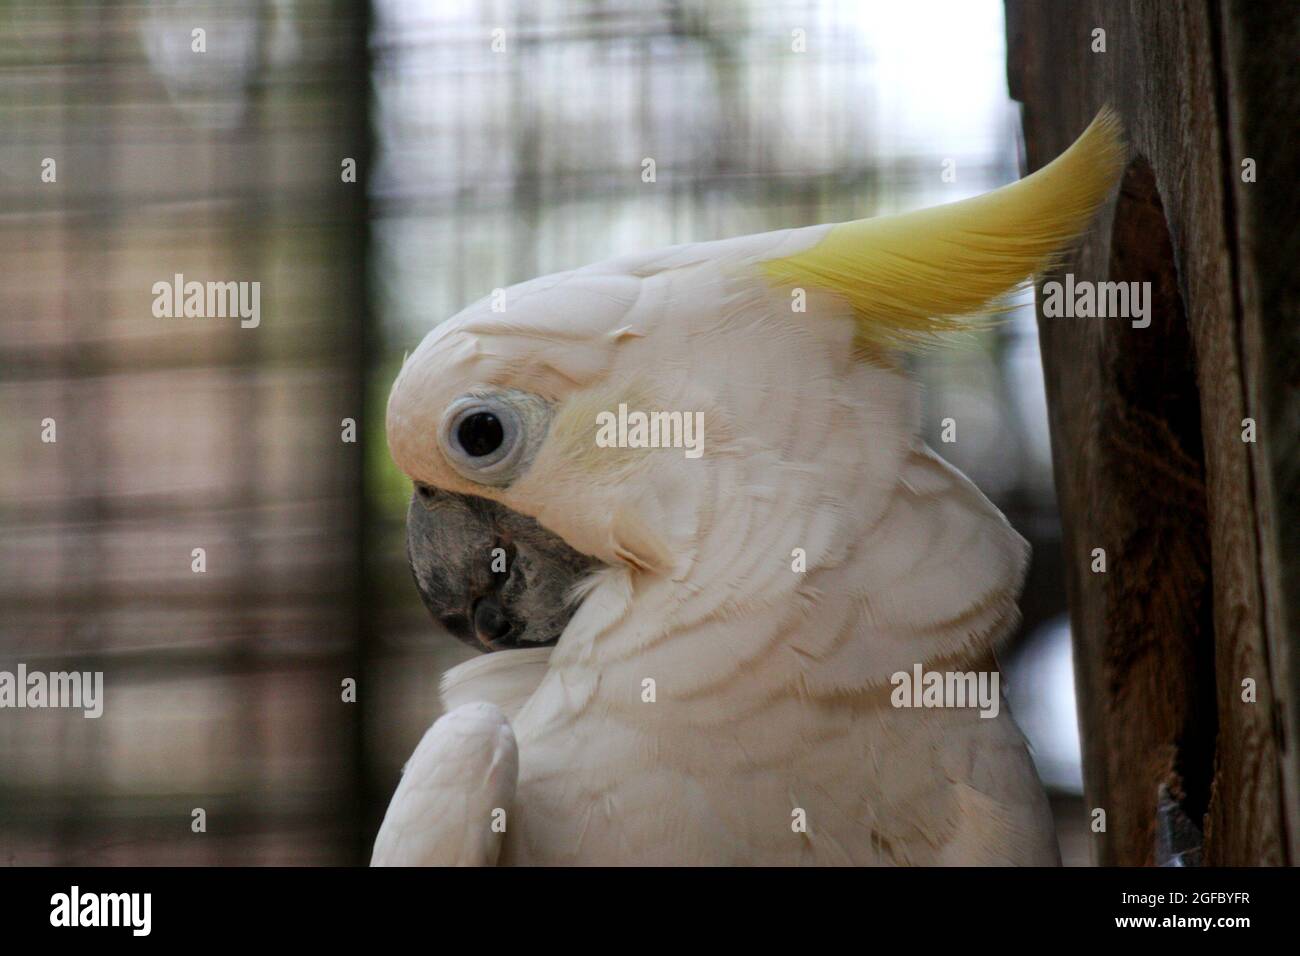 The yellow-crested cockatoo also known as the lesser sulphur-crested cockatoo, Stock Photo